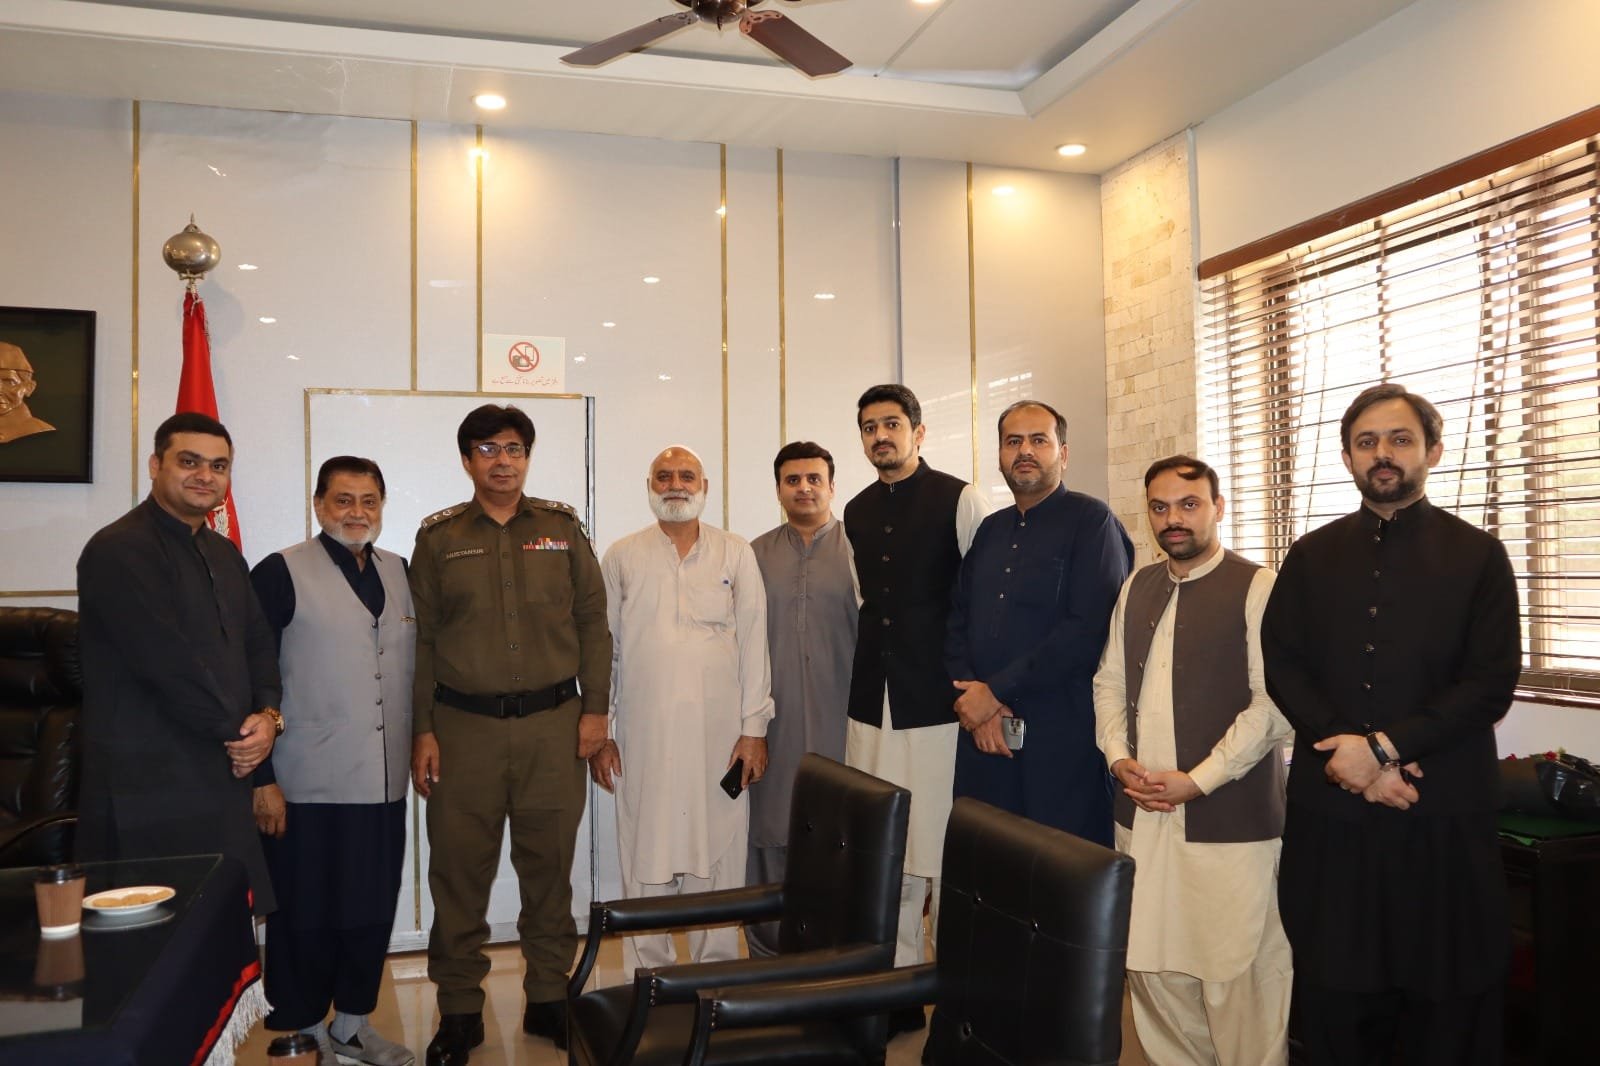 "A delegation from Gujrat Chamber of Commerce & Industry, led by Haji Nasir Mahmood Group Leader, paid a visit to the #DPO Office #Gujrat to congratulate Mr. Mustansar Ata Bajwa on his appointment as the new District Police Officer.